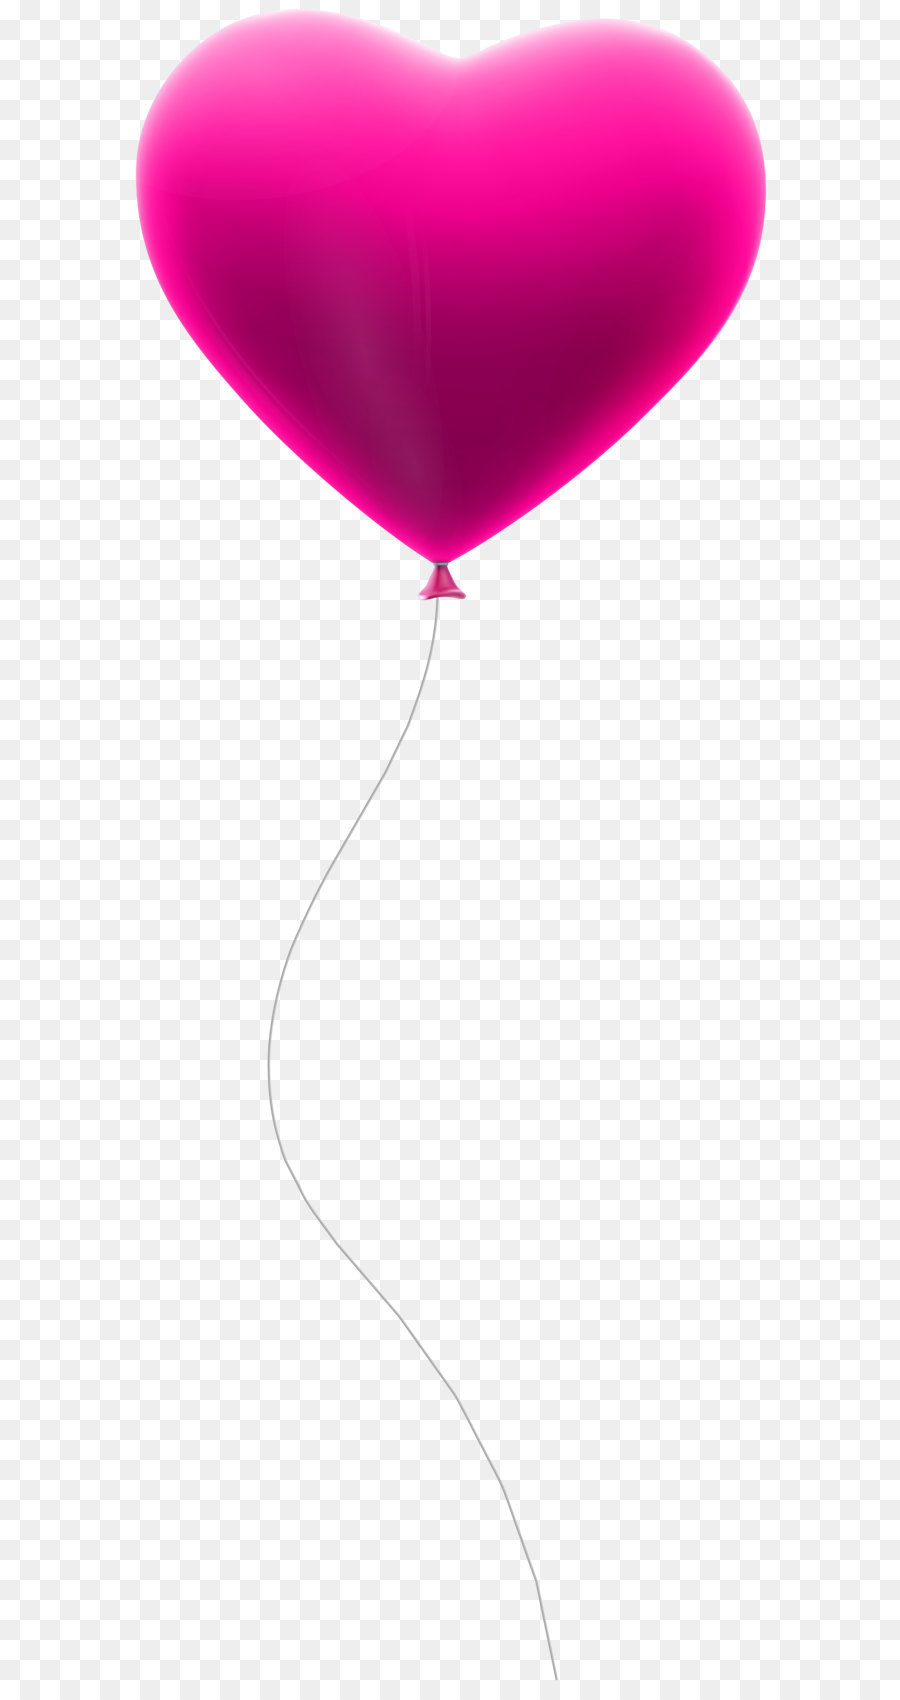 Heart Red Balloon - Pink Heart Balloon Transparent Clip Art png download - 3070*8000 - Free Transparent  png Download.